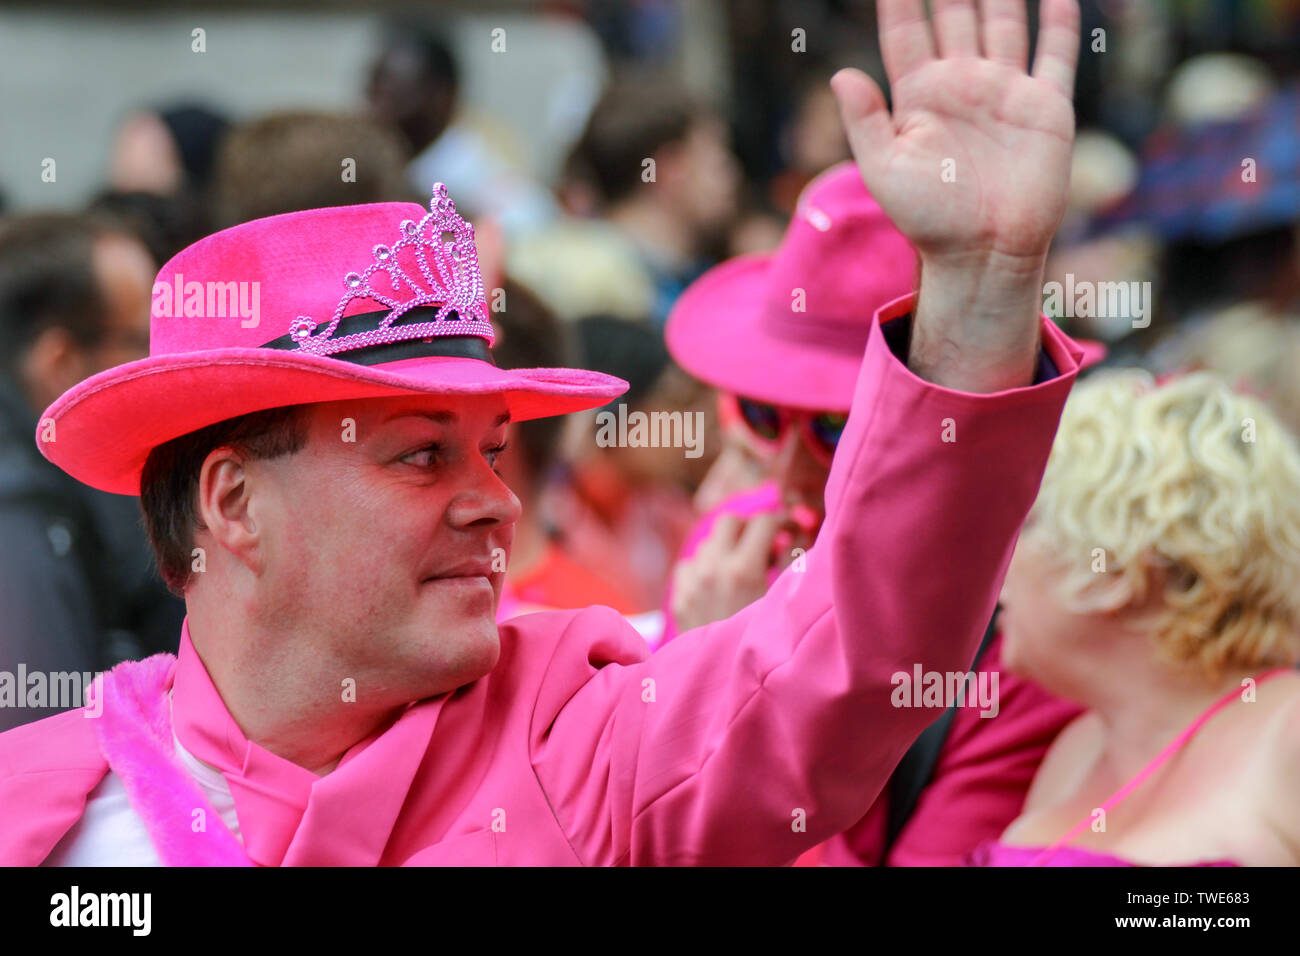 Middle-aged man wearing pink clothes and tiara in Pride in London Parade 2014 in London, England Stock Photo